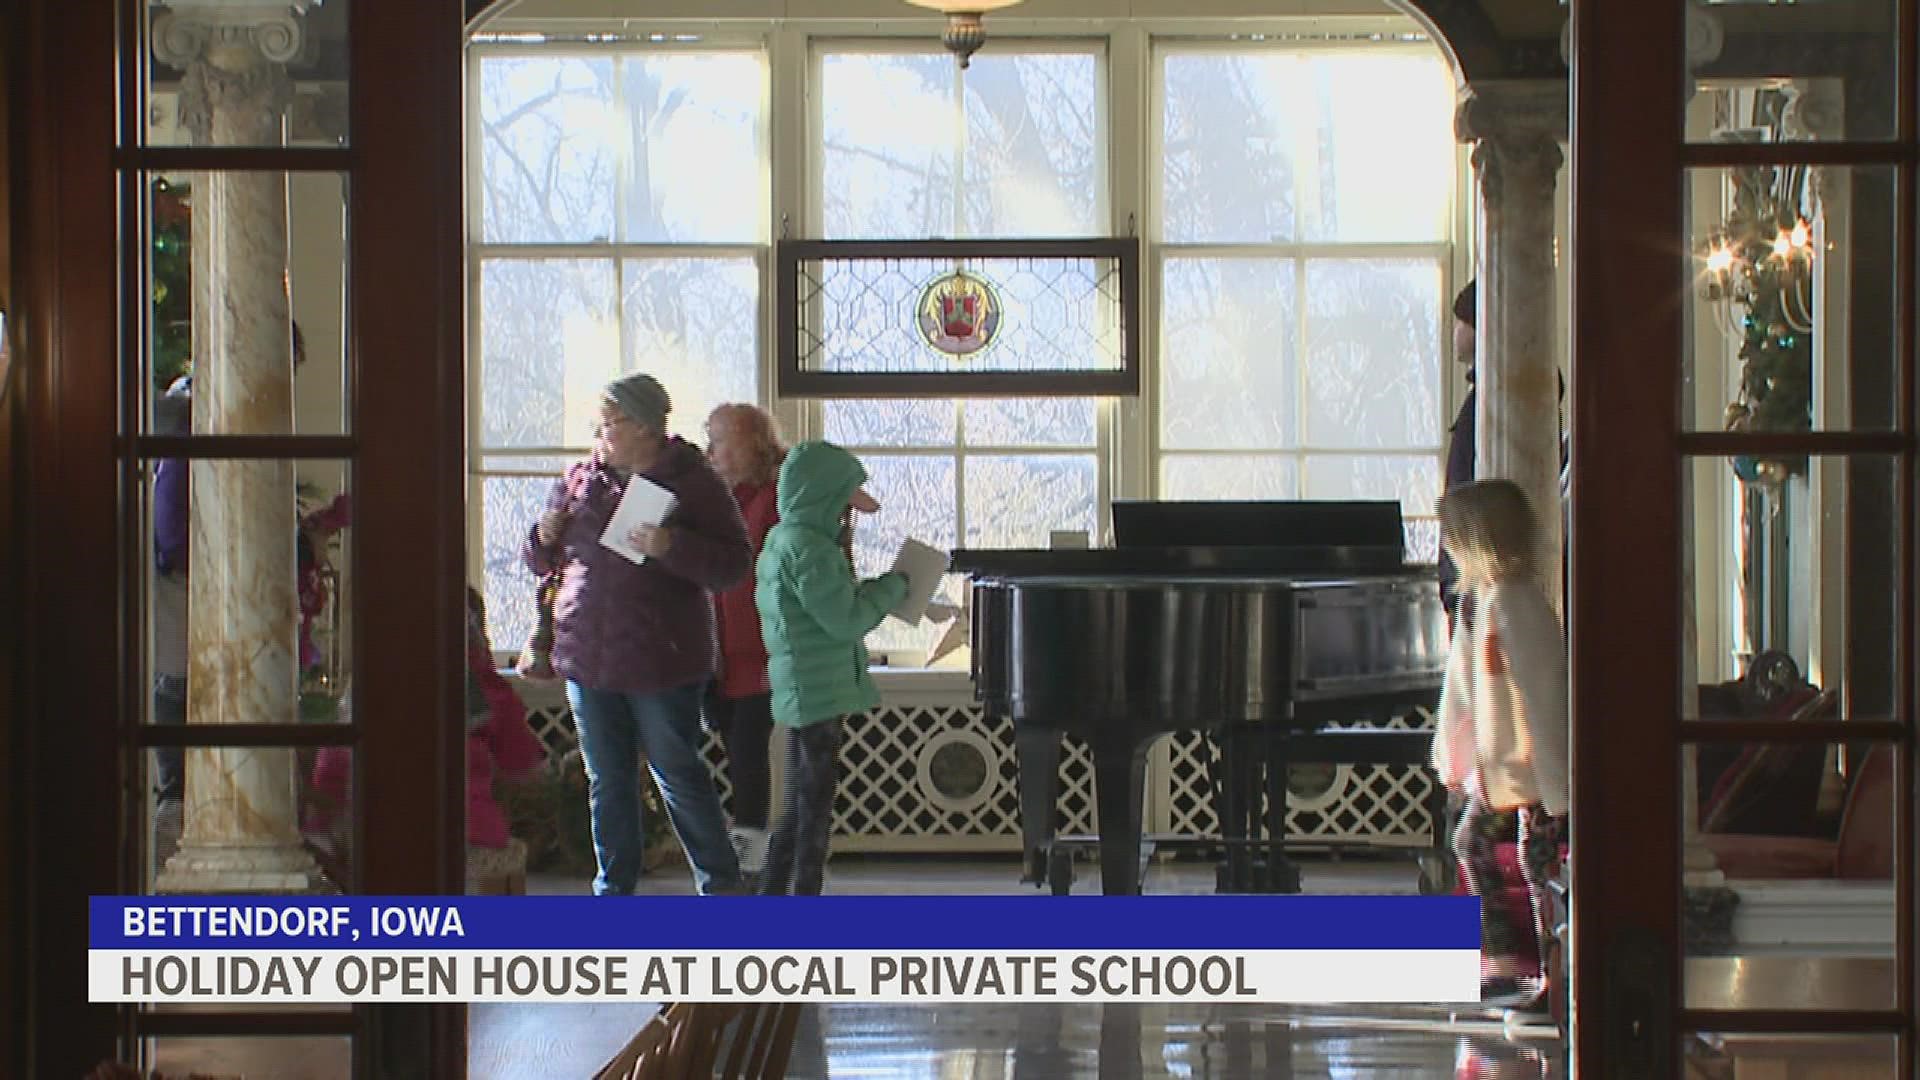 Bettendorf's Rivermont Collegiate School held its holiday open house at the Joseph Bettendorf Mansion. Visitors took self-guided tours of the property.